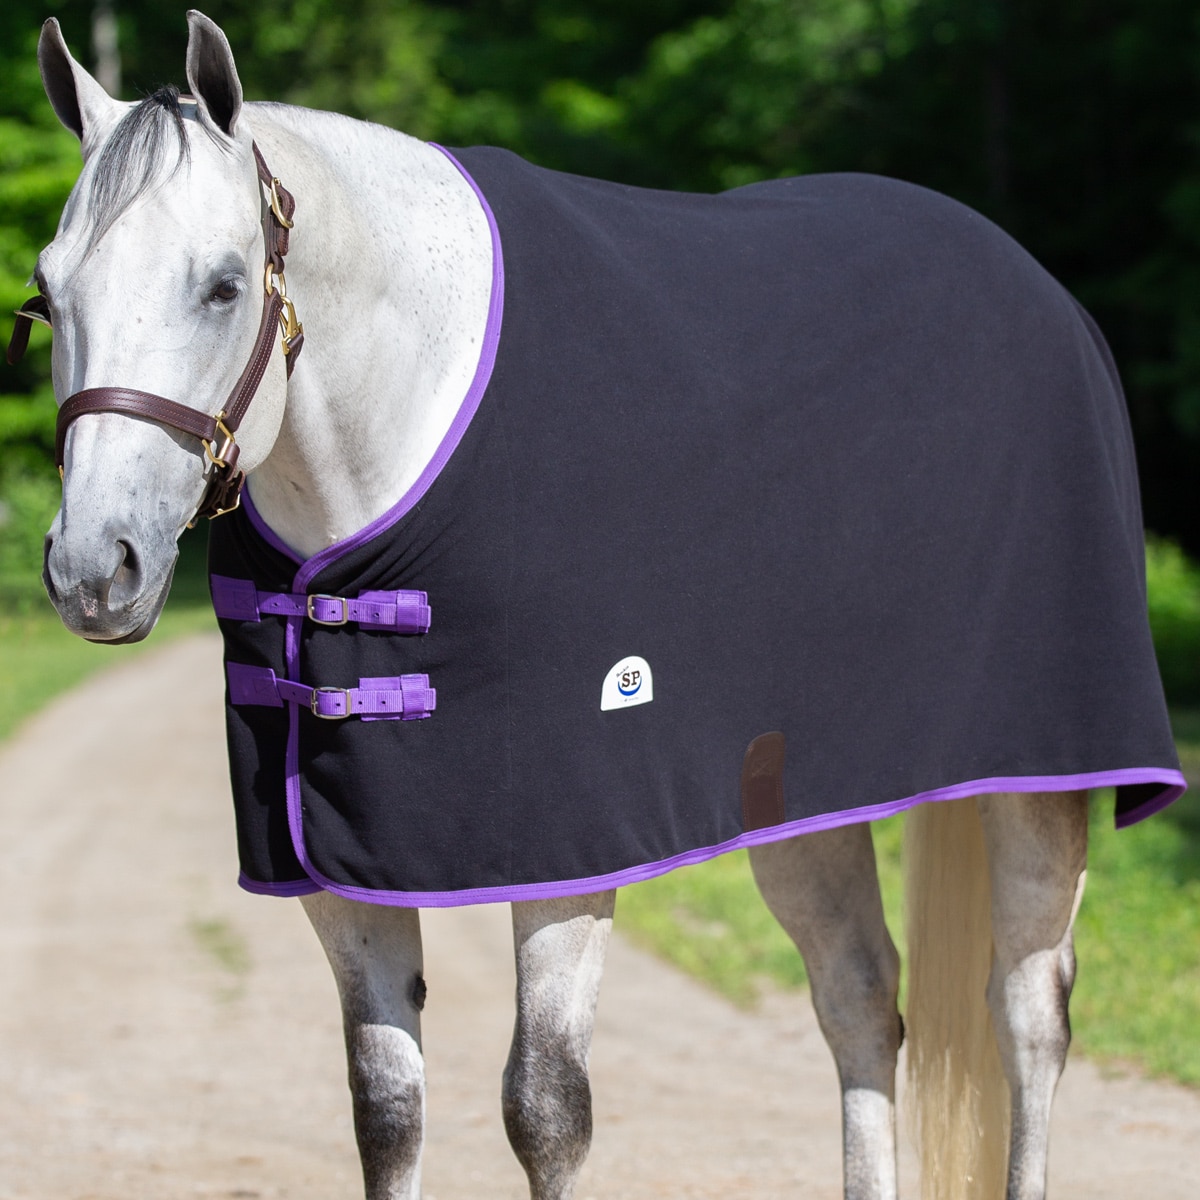 or as a Blanket Liner for Chilly Weather TEKE Fleece Cooler with Double Side Anti-Pilling for Horse Cooling and Drying Workout/Bath 